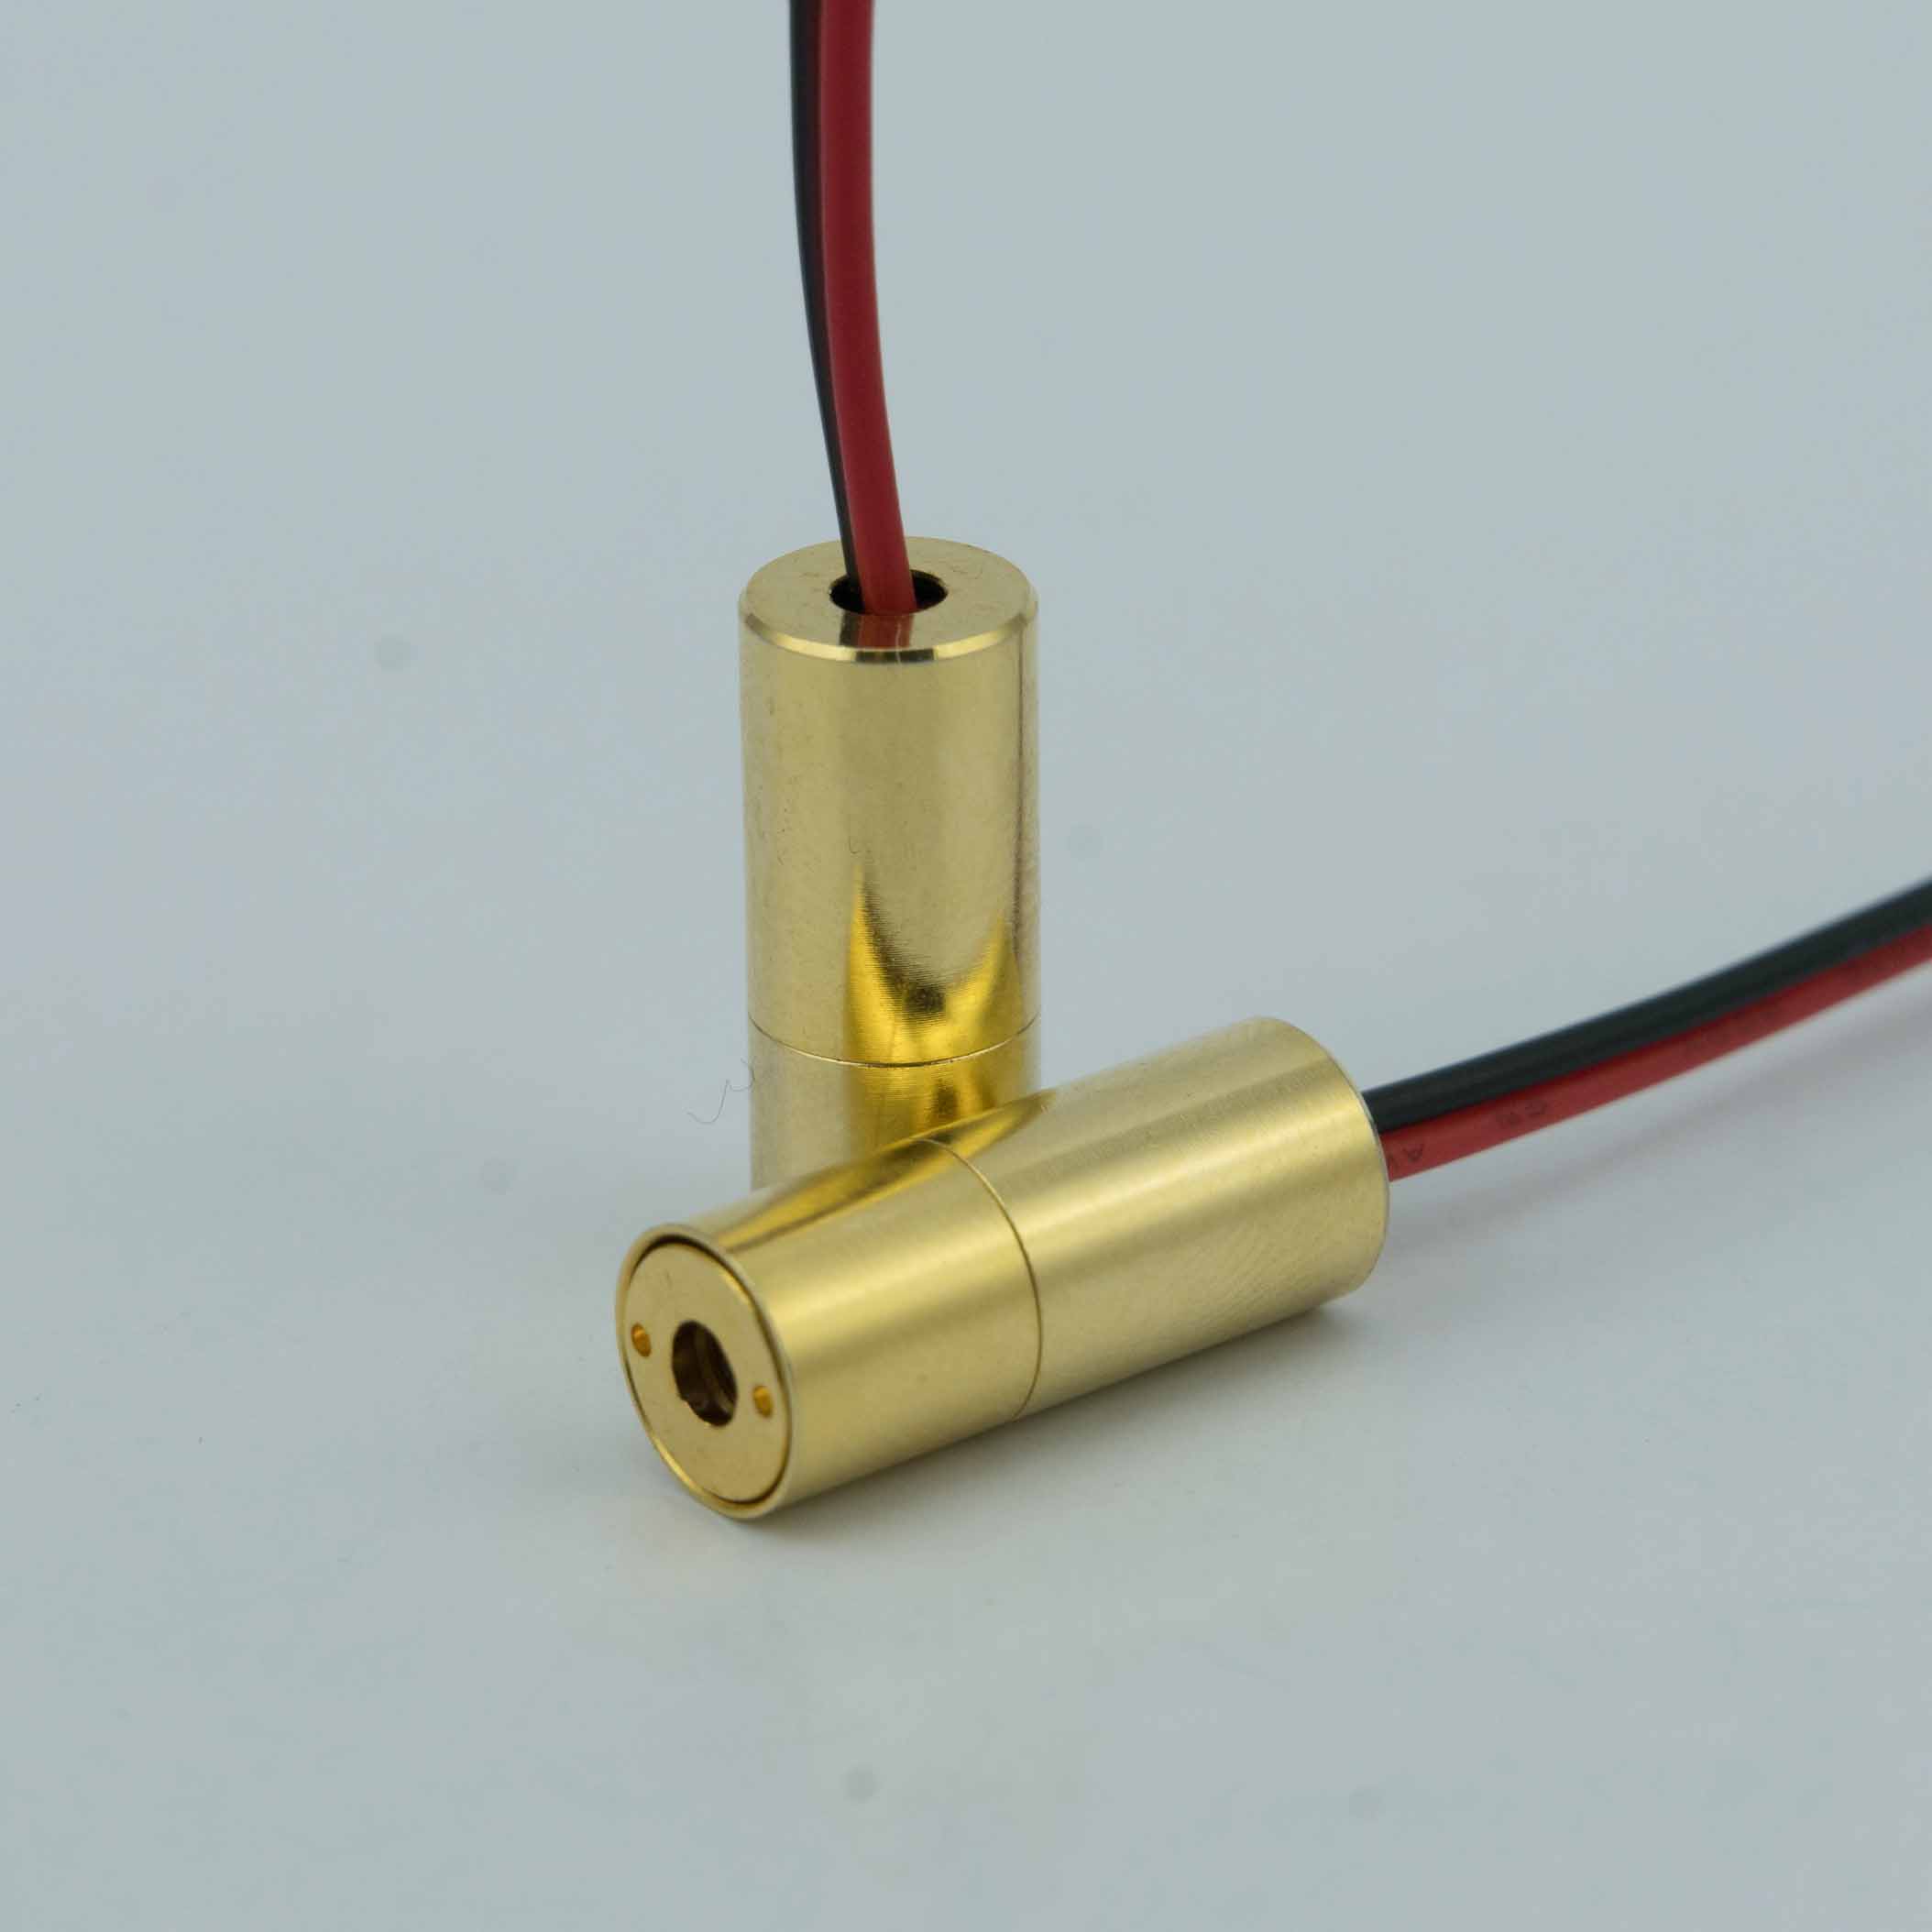 650nm 1mW Class II Red Laser Diode Module for Medical Laser Instrument